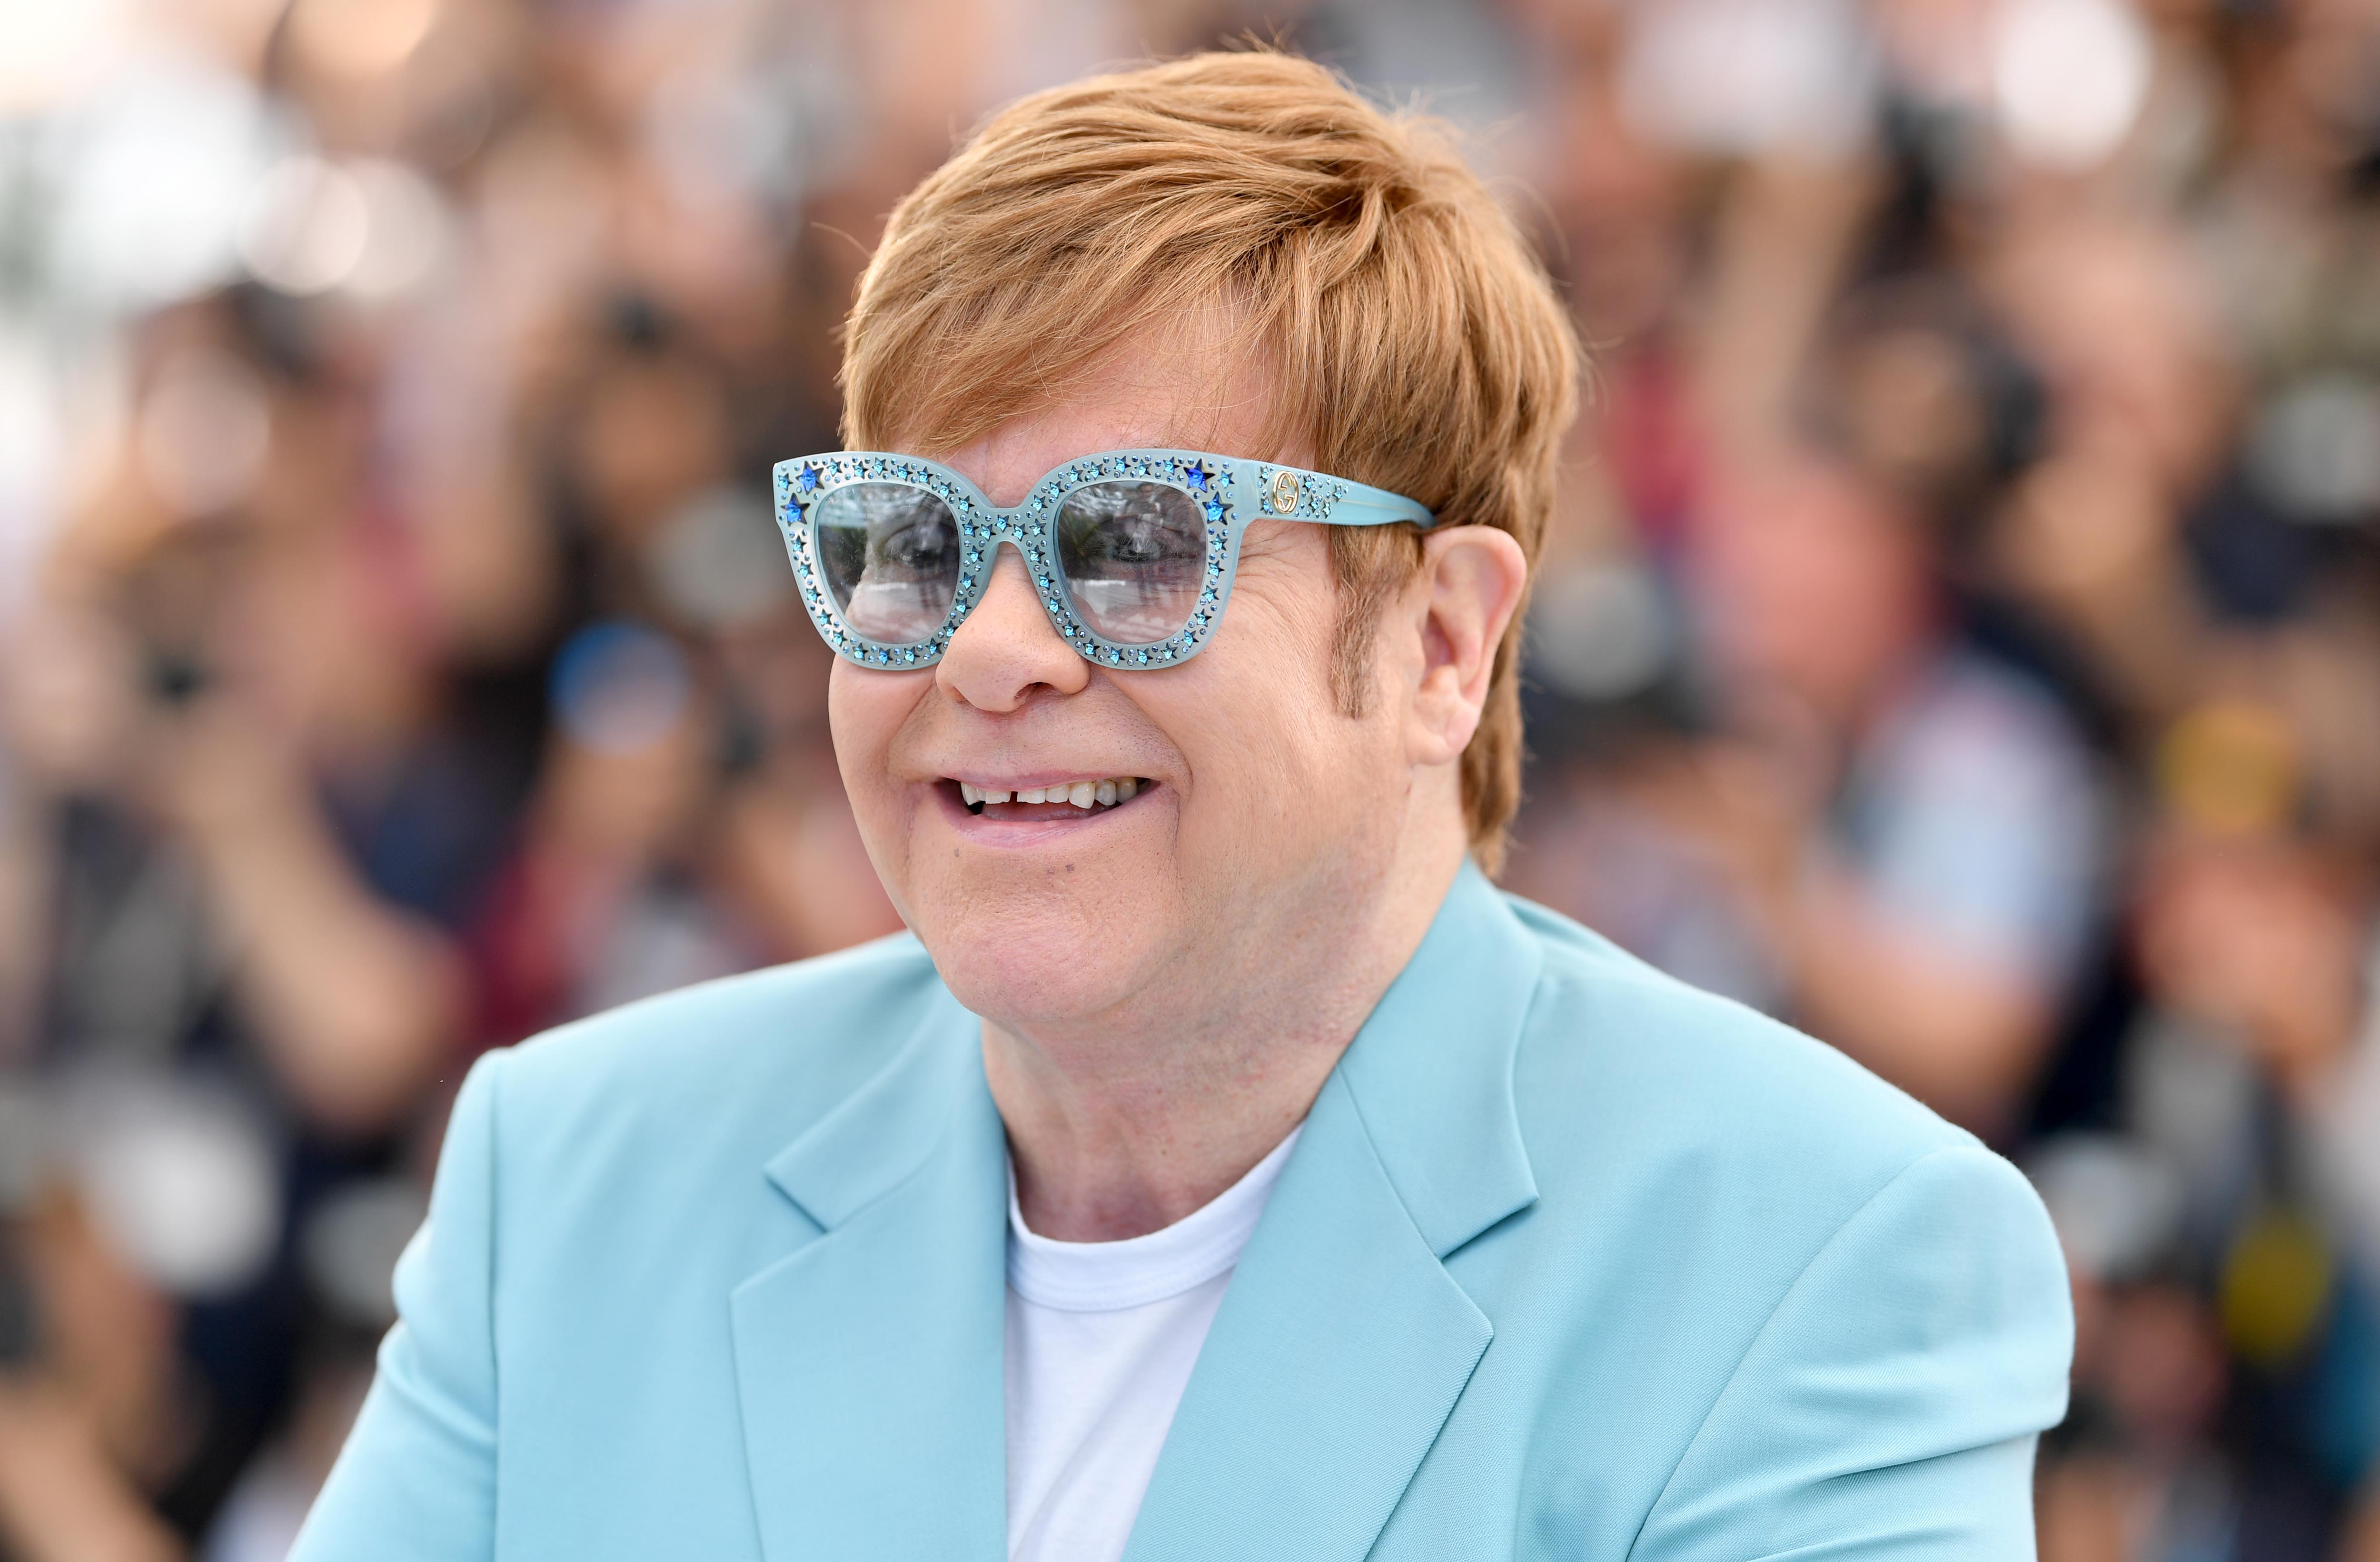 Elton John attends a "Rocketman" photocall on May 16, 2019 | Source: Getty Images